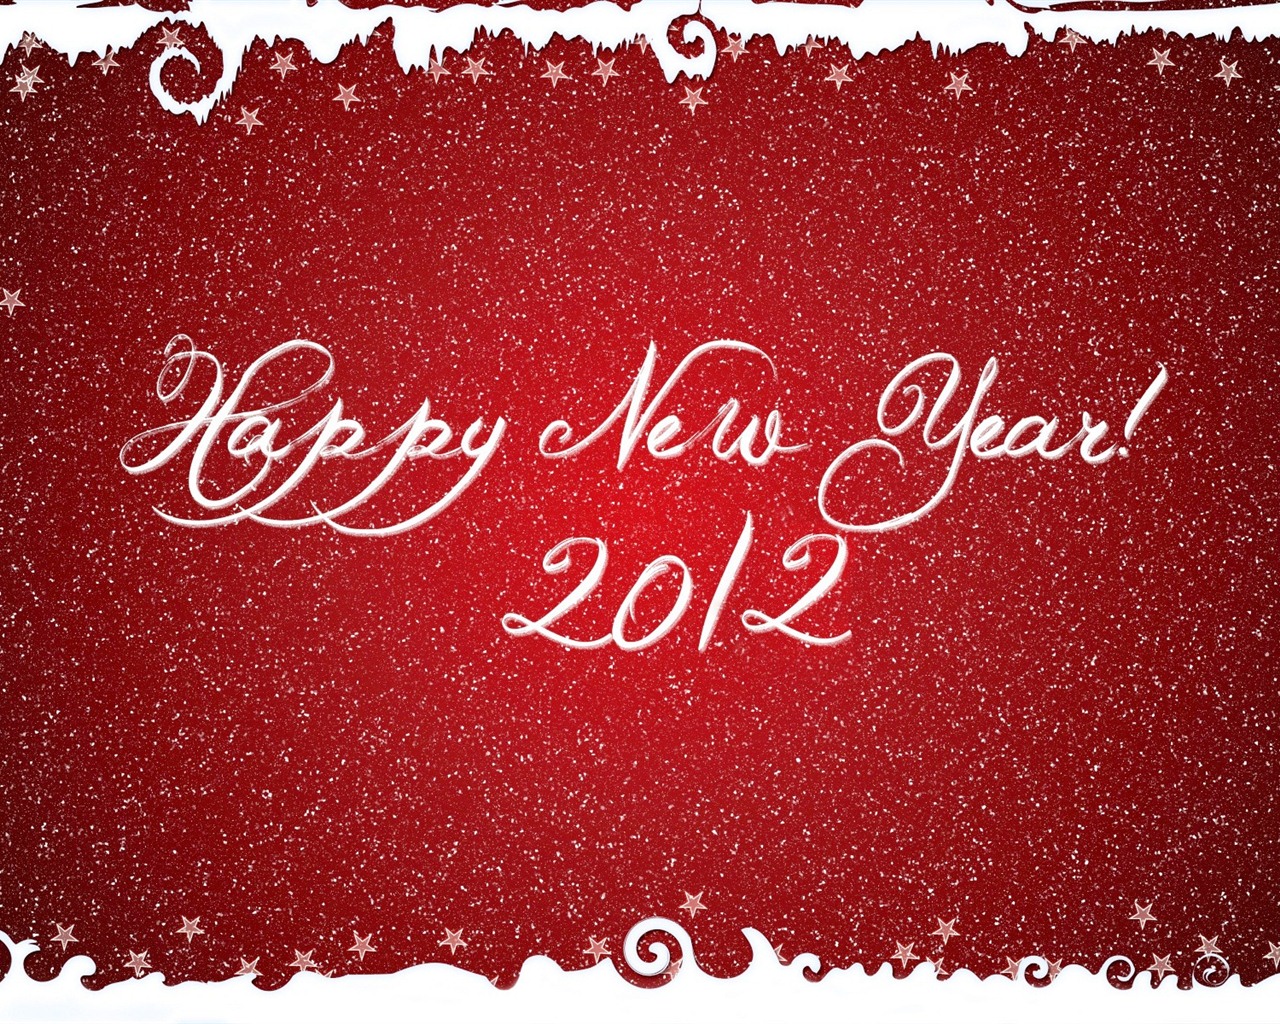 2012 New Year wallpapers (2) #6 - 1280x1024